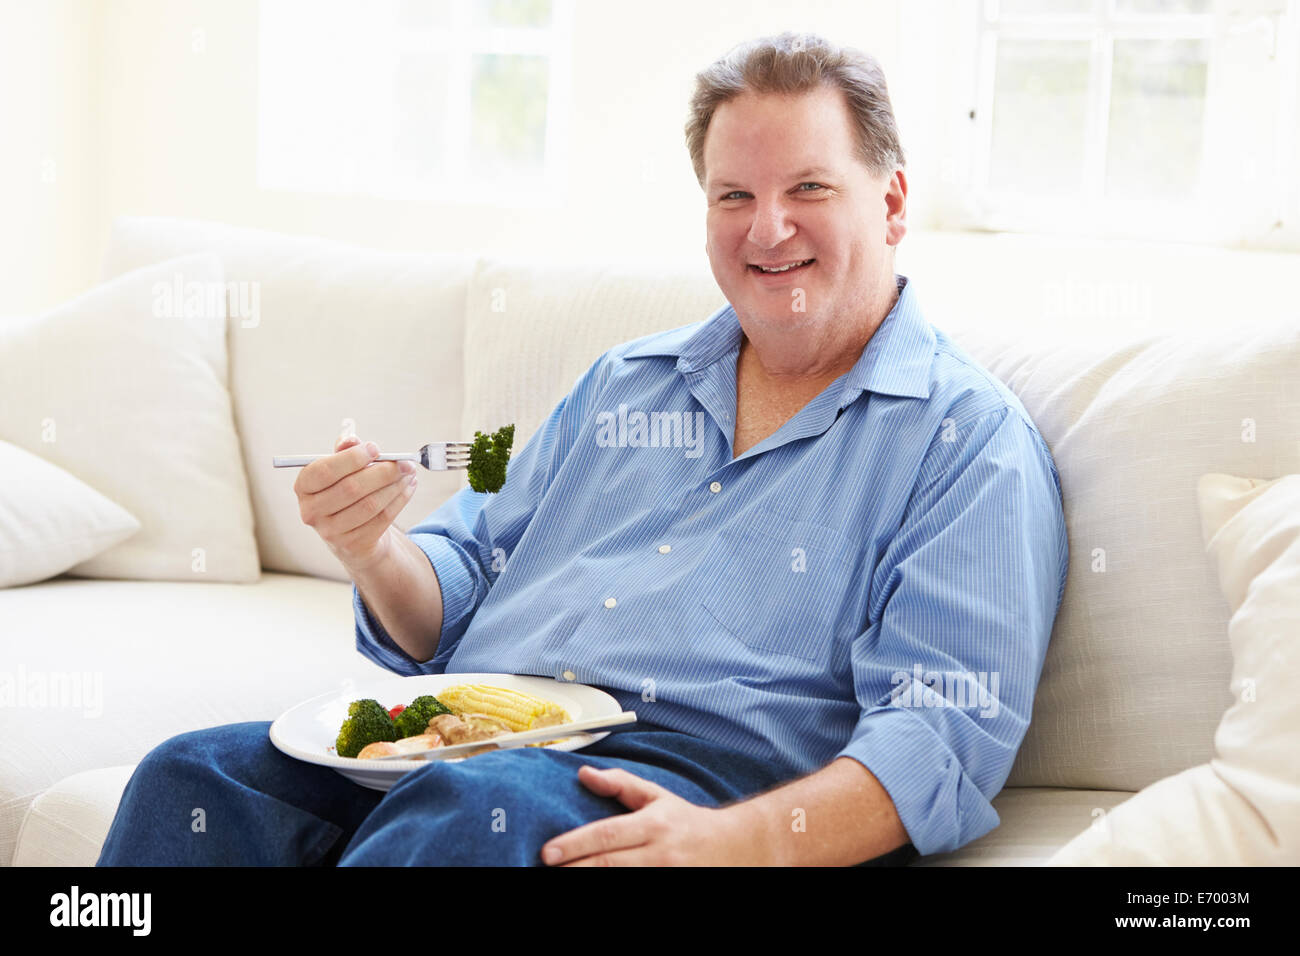 Overweight Man Eating Healthy Meal Sitting On Sofa Stock Photo